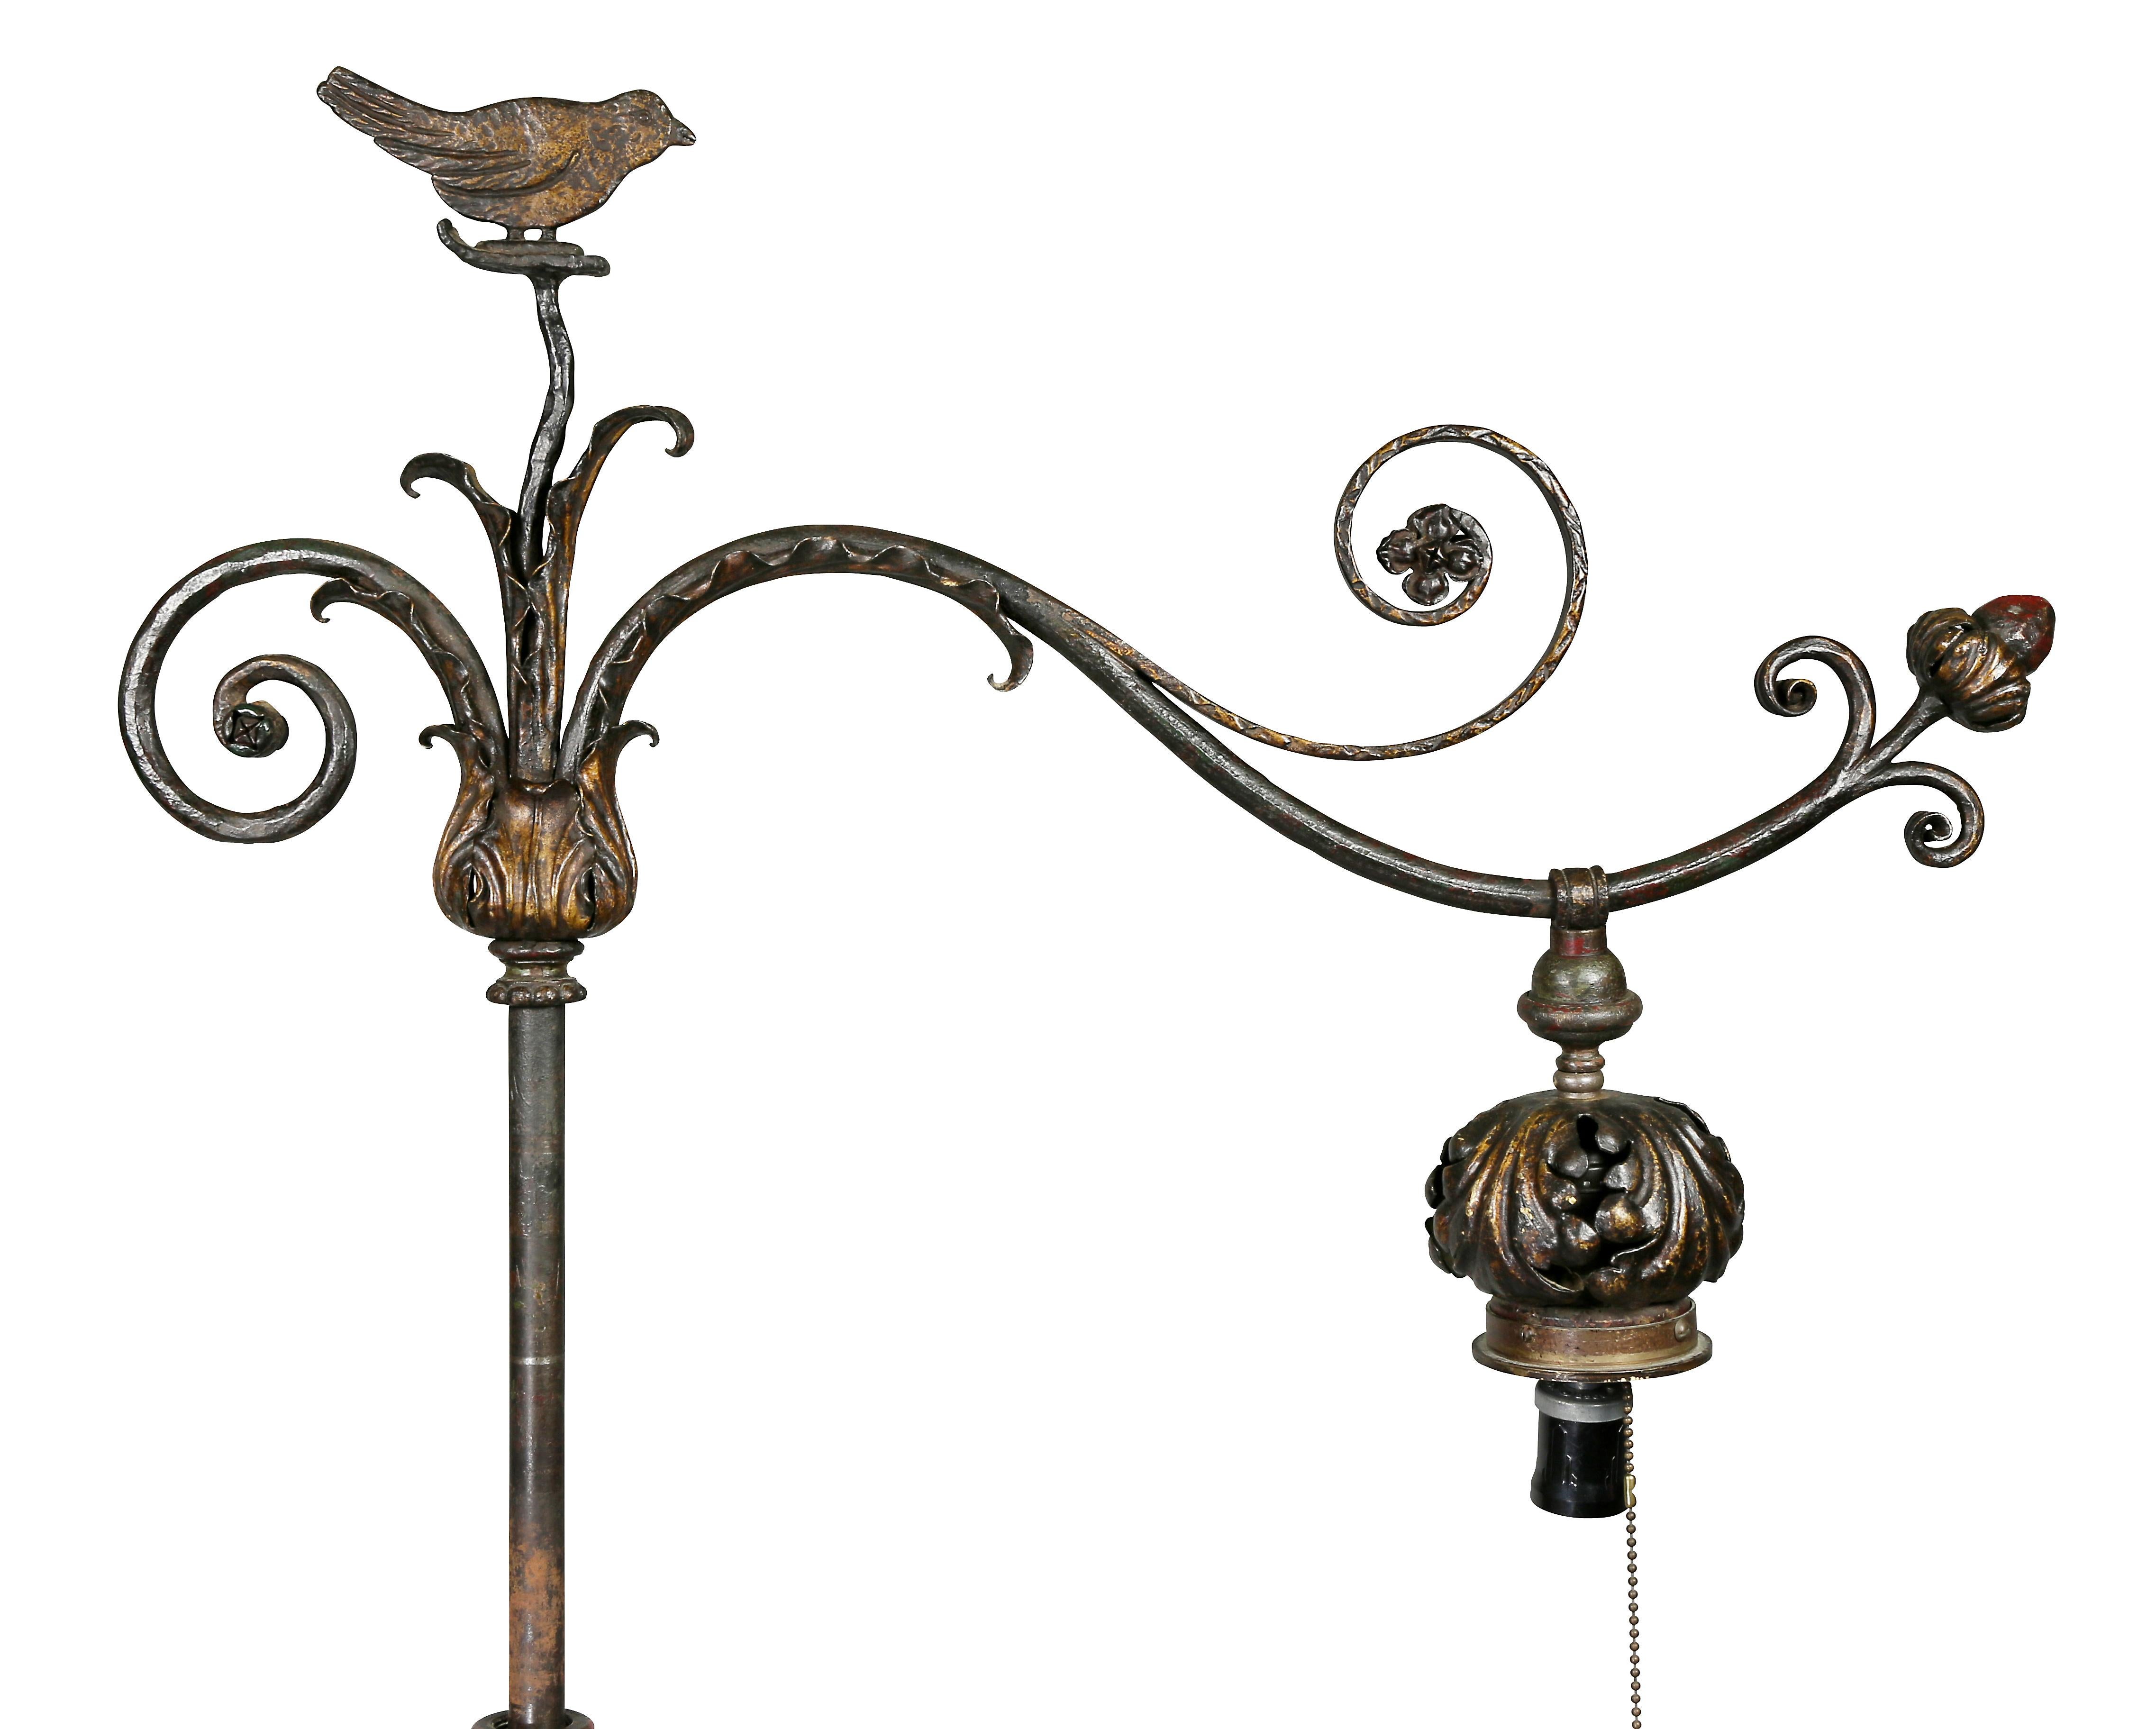 Wonderfully whimsical with a singing bird atop the arm for the light and scrolled designs, shaped support with flower heads and leaf design joining four scrolls and a circular marble base. Great old paint highlights and patina.